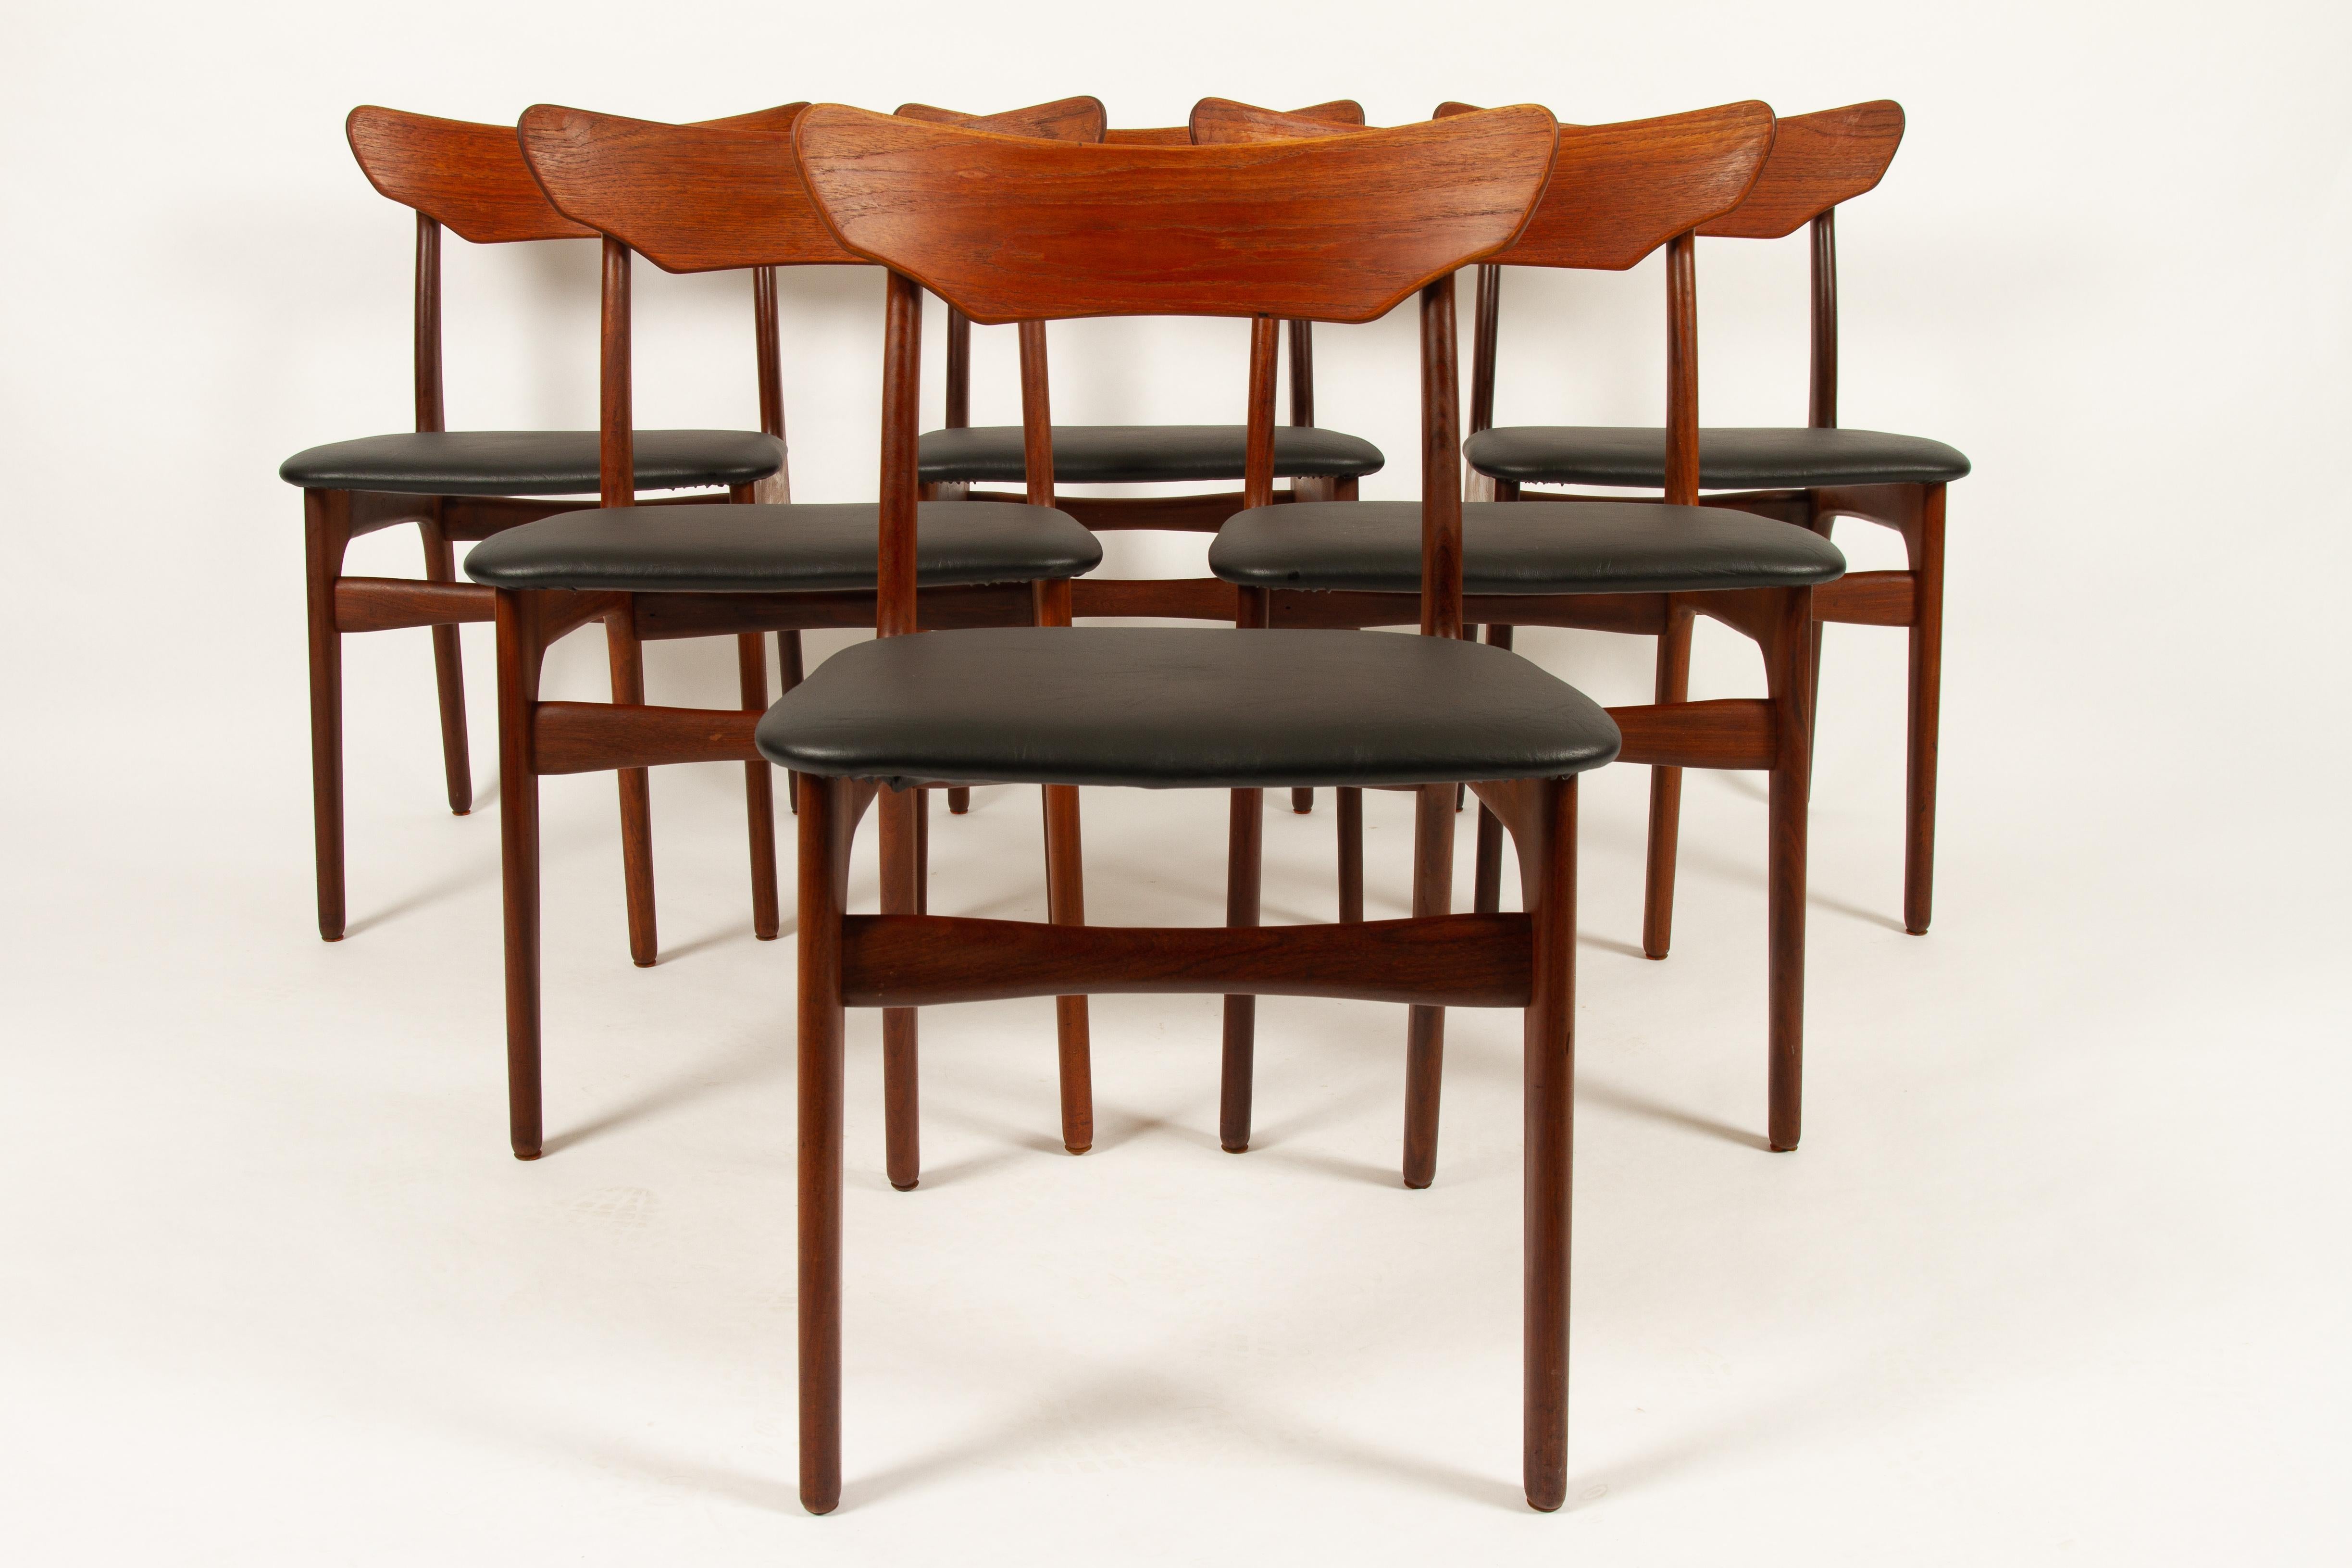 Beautiful set of six midcentury teak dining chairs. Sculpted backrests and a solid teak frame. Restored and reupholstered for maximum comfort, ready to enjoy. A classic Danish modern chair.